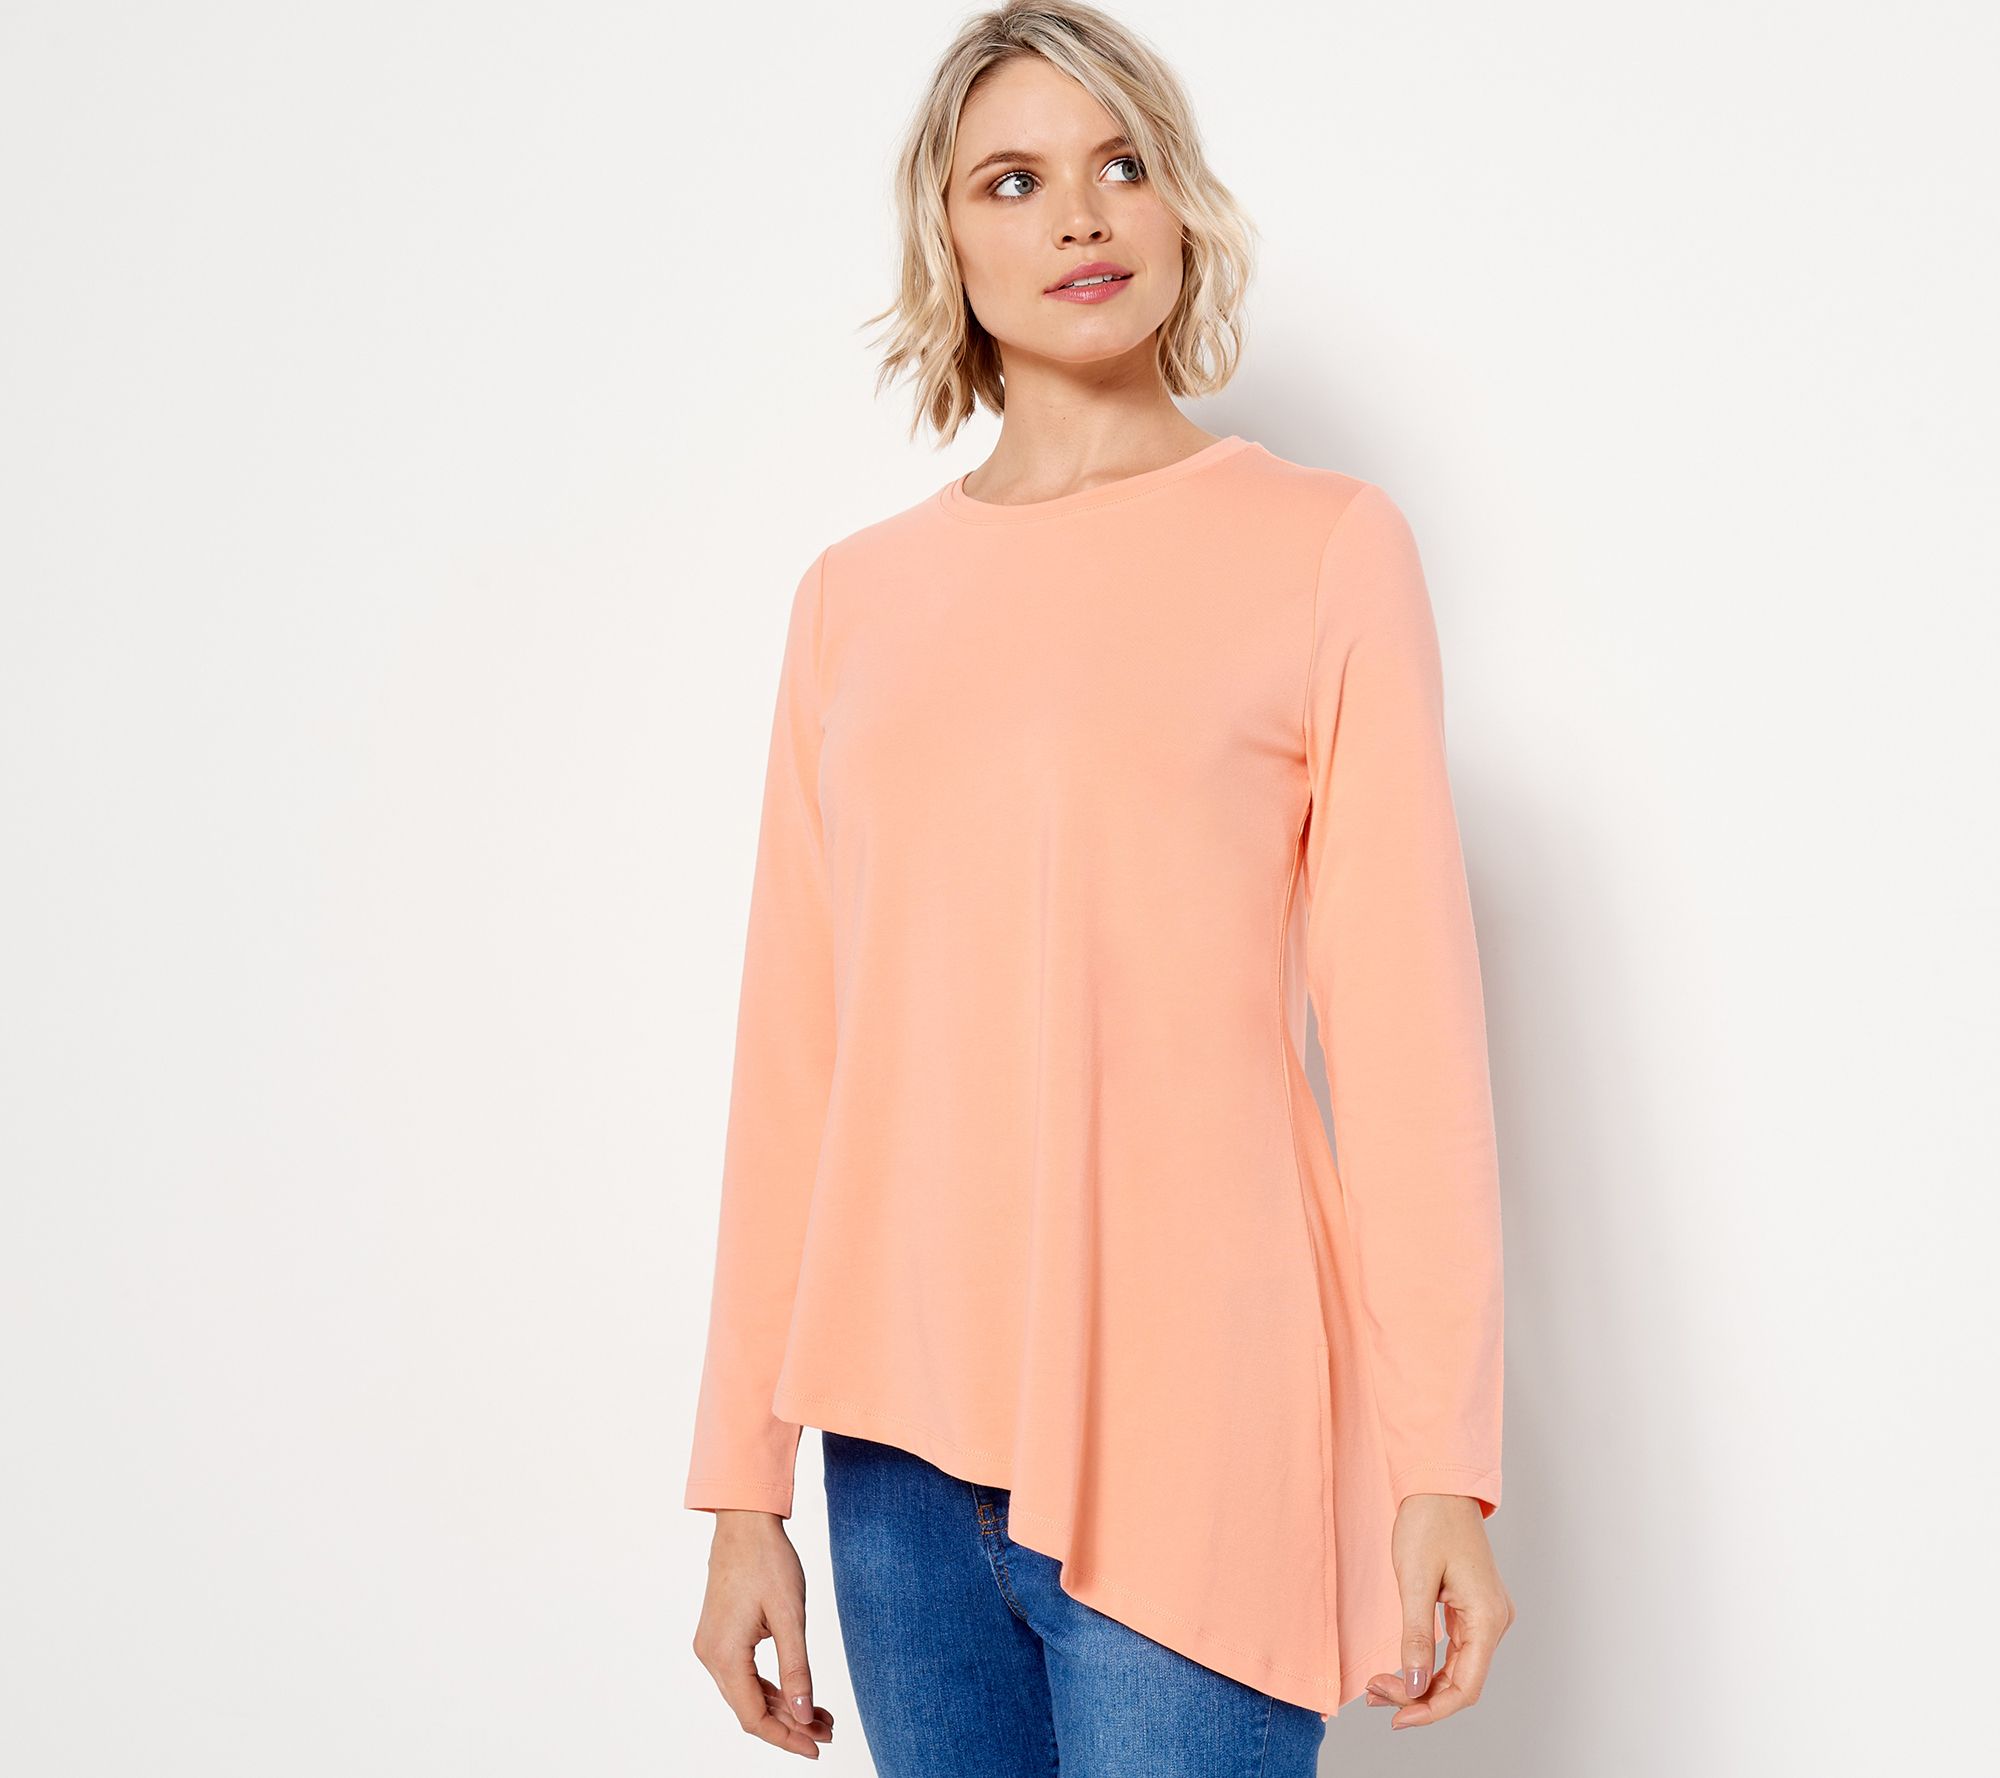 Ladies Apricot Off The Shoulder Frill Top Size 20/22 New Shop Clearance